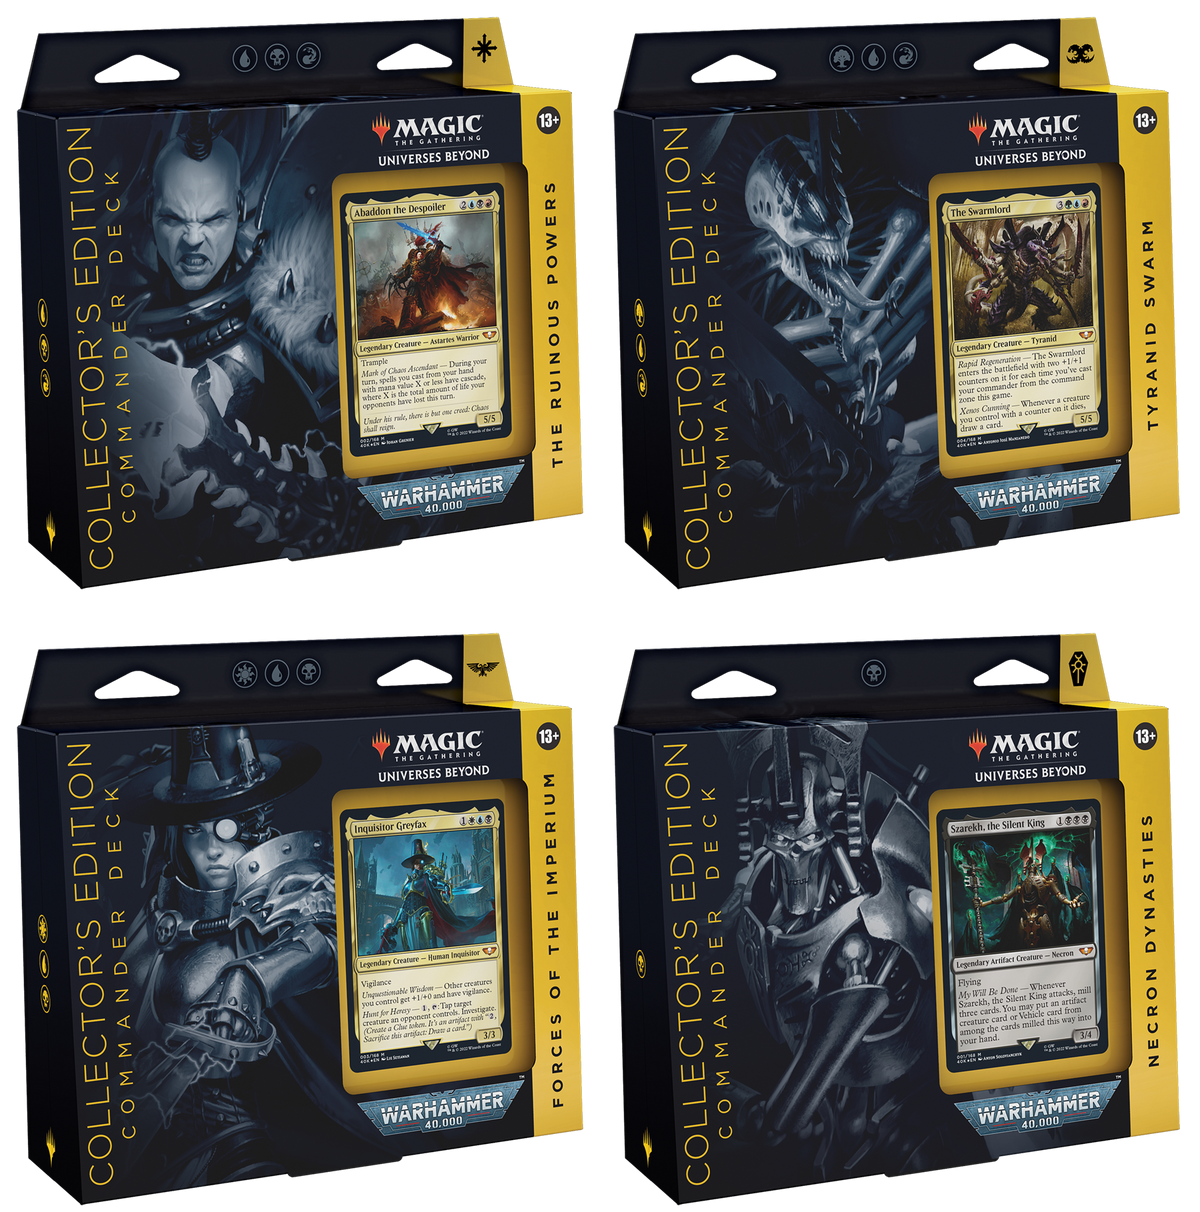 Magic the Gathering - Universes Beyond: Warhammer 40,000 (Collectors Edition Commander Deck)